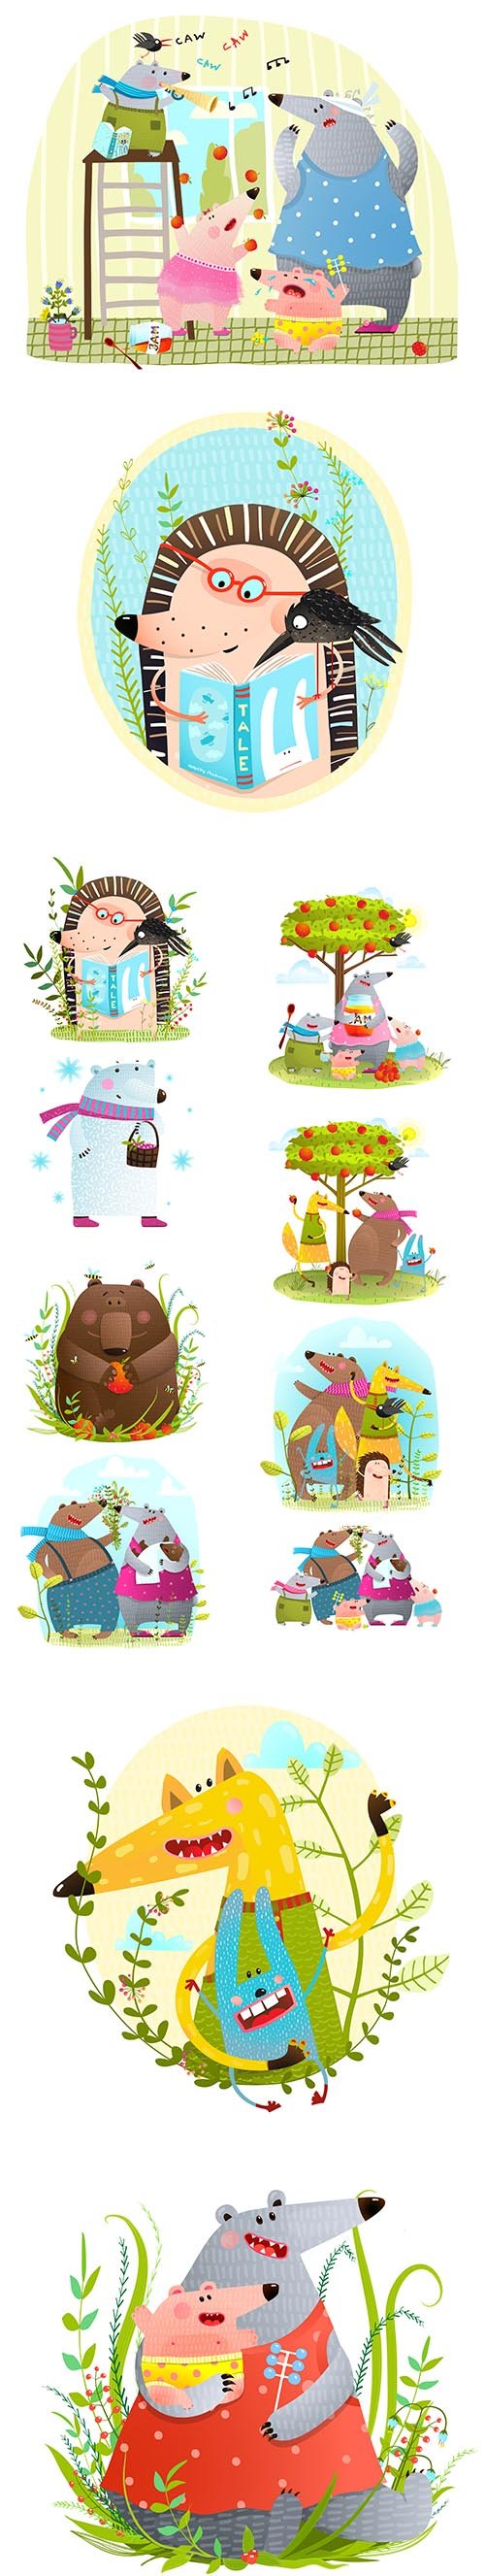 Bear Family and other animals forest